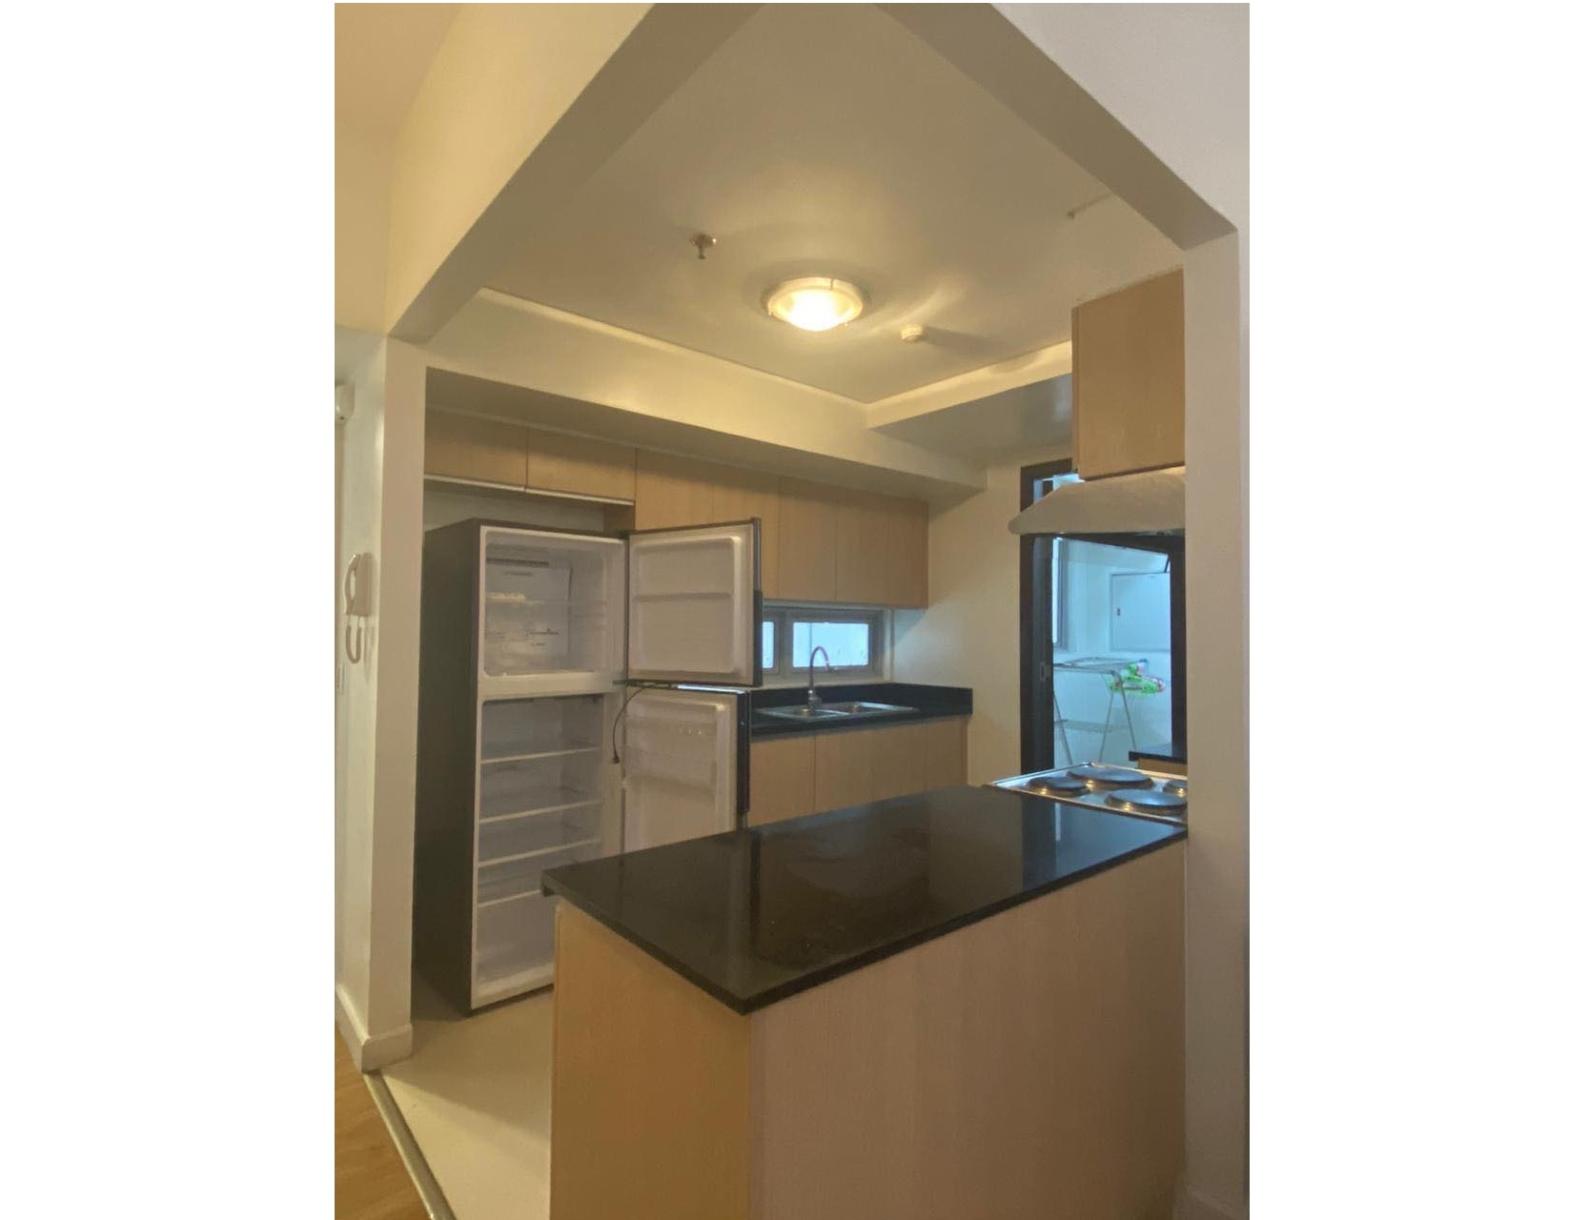 3BR Condo unit for Lease in Verve Residences Tower 1